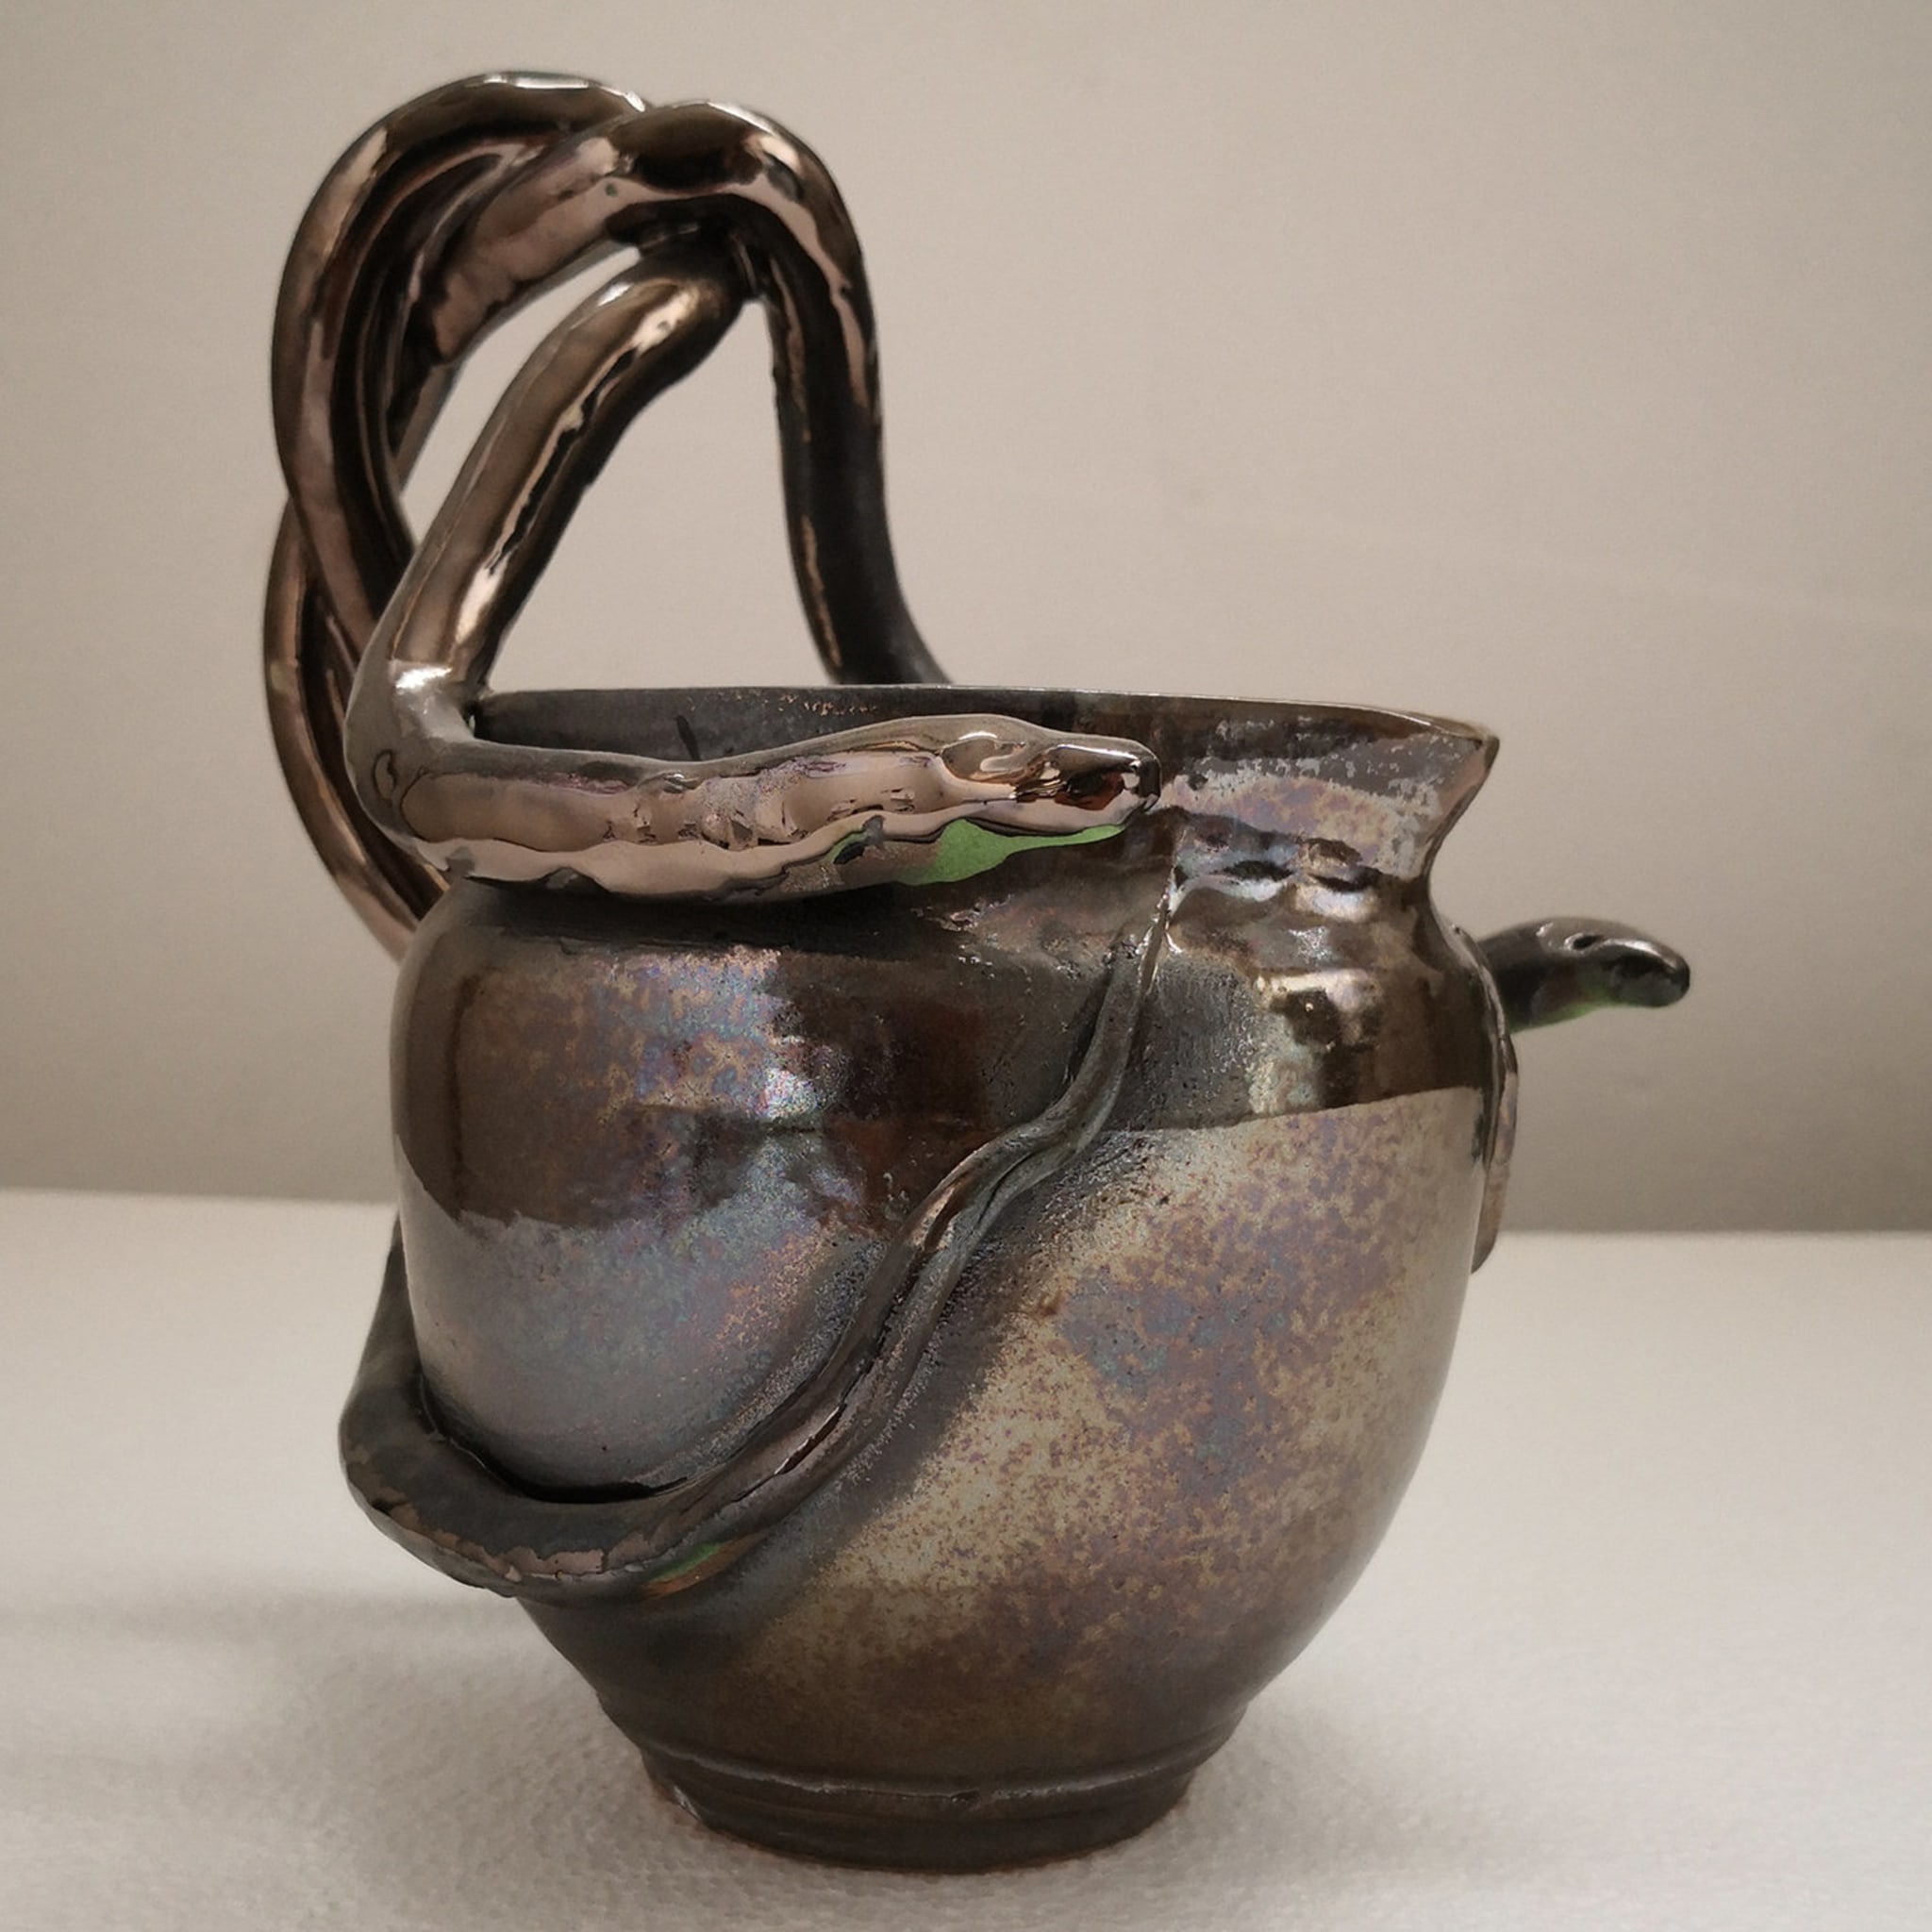 Black Ceramic Water Pitcher with Snakes - Alternative view 1